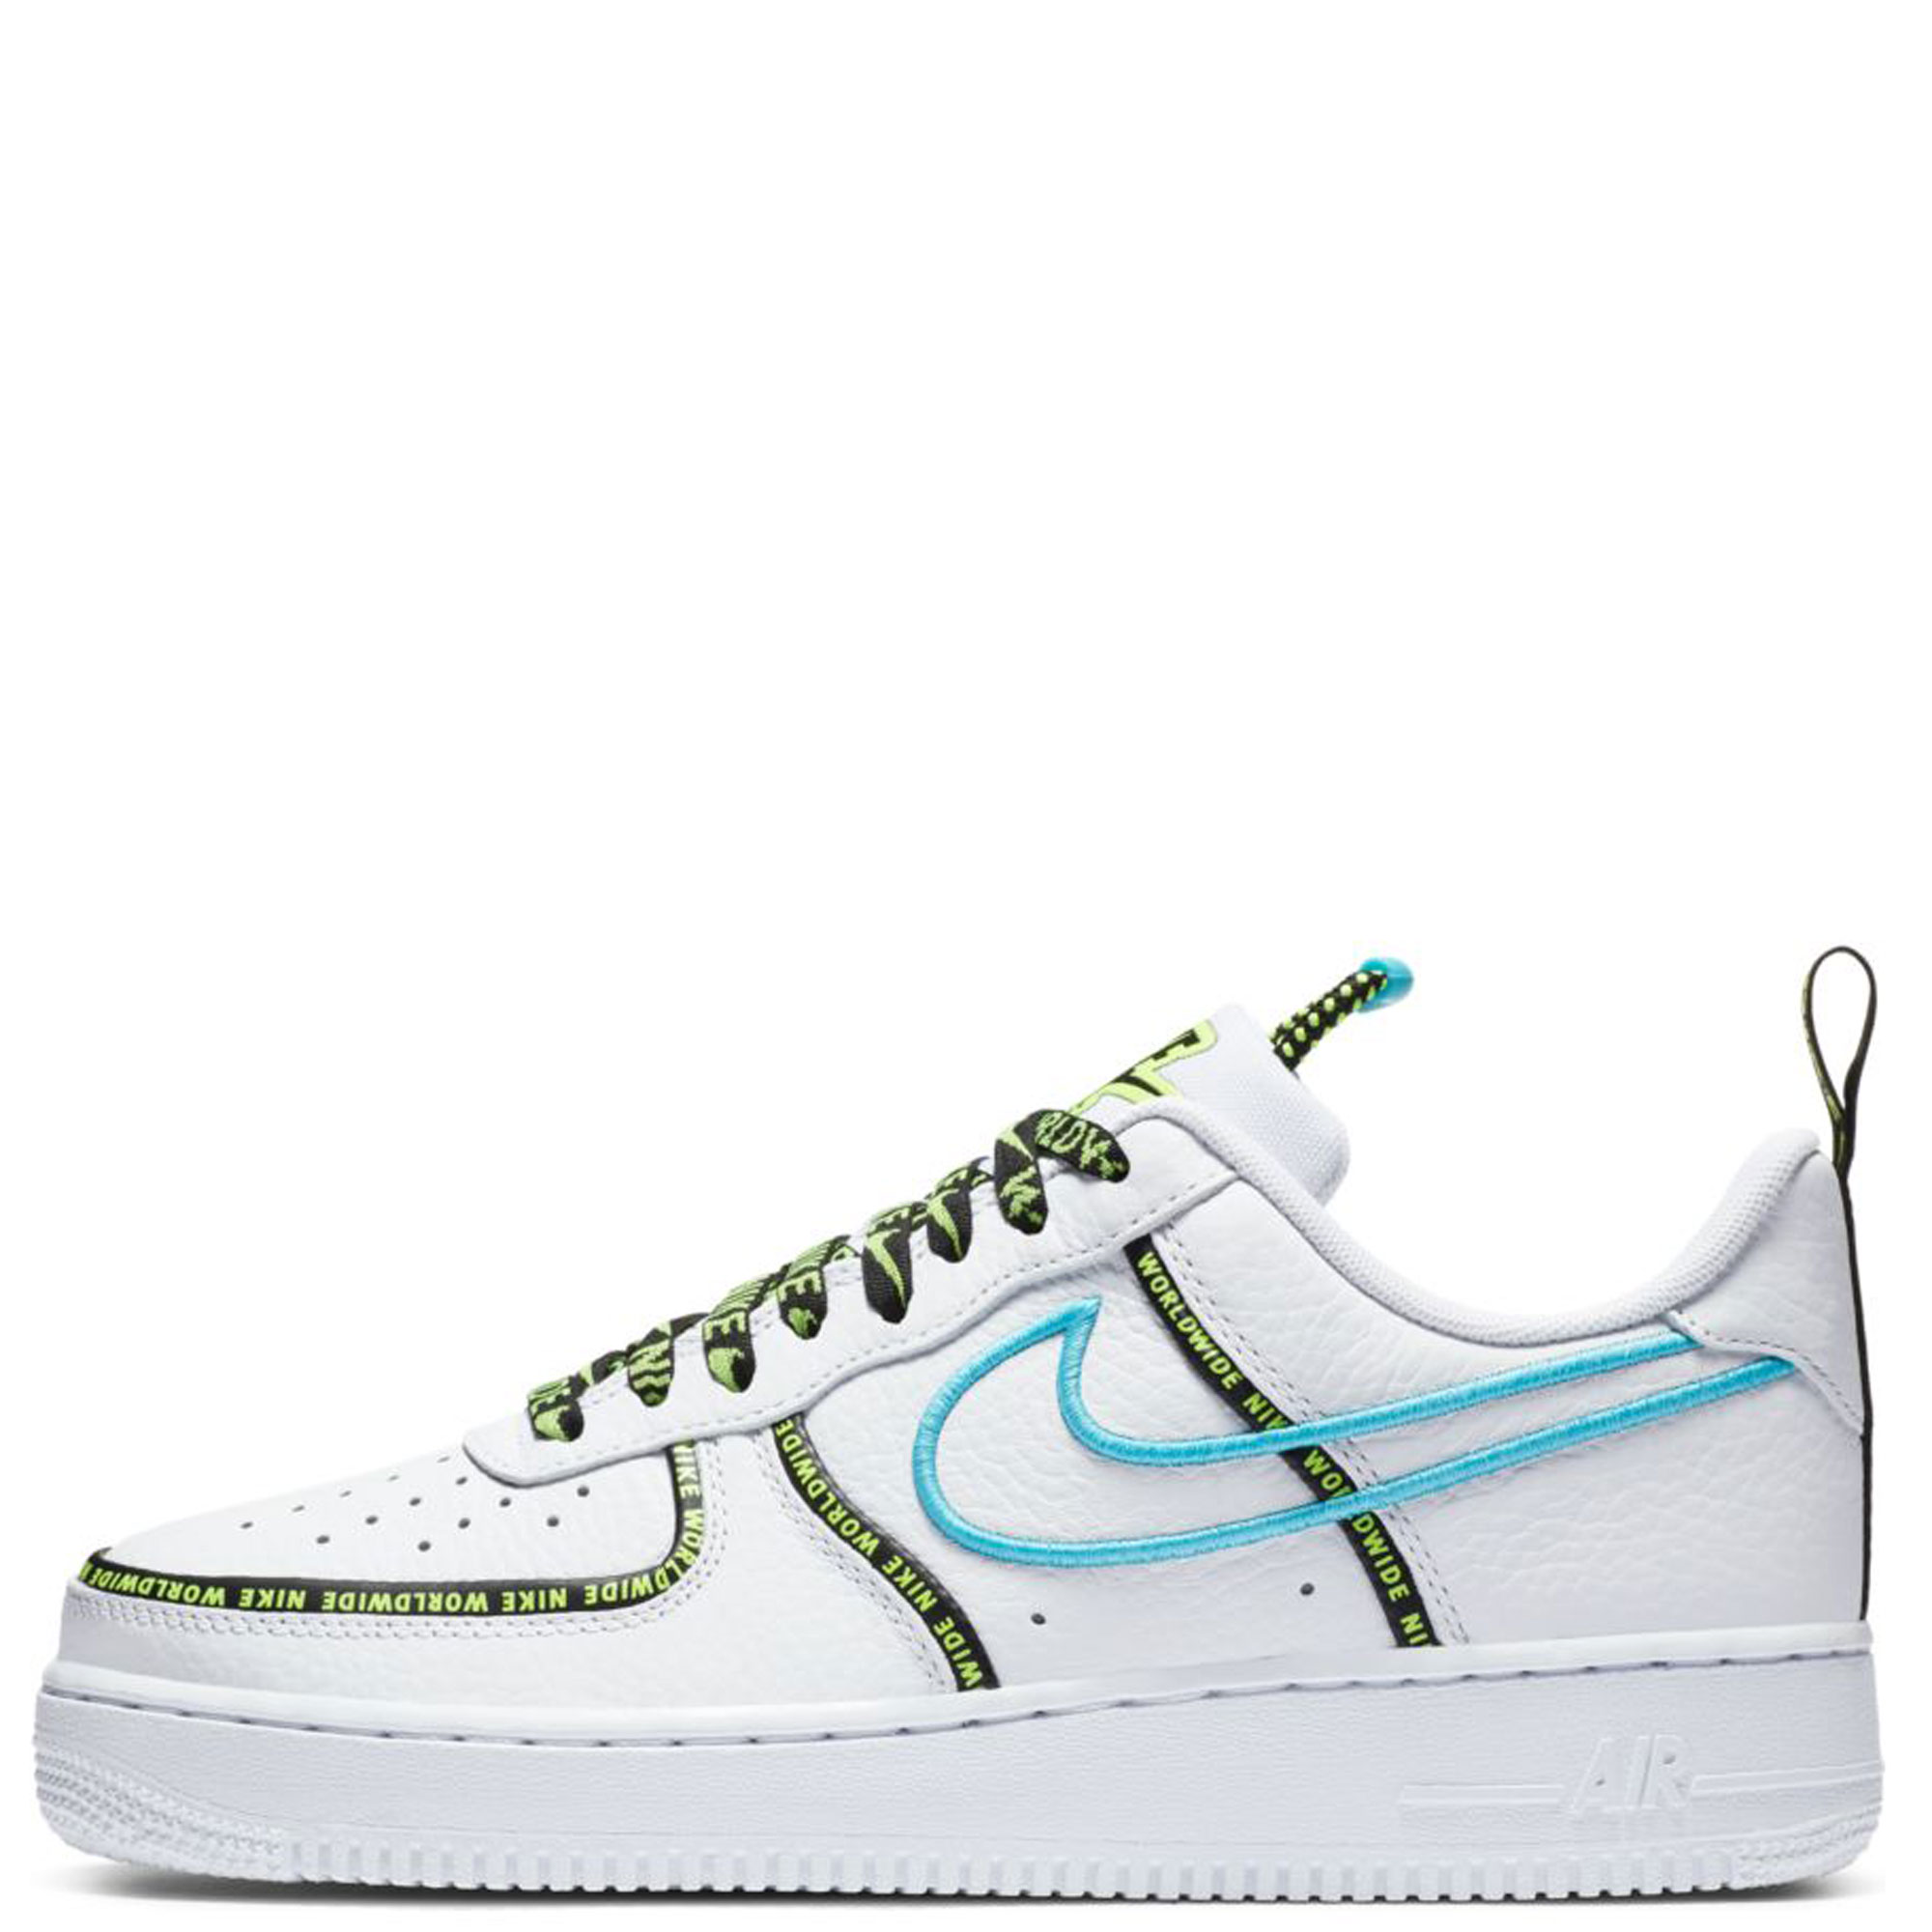 Nike Air Force 1 World Wide Pack White/Blue Lime Green Sz 8 ck7213 100